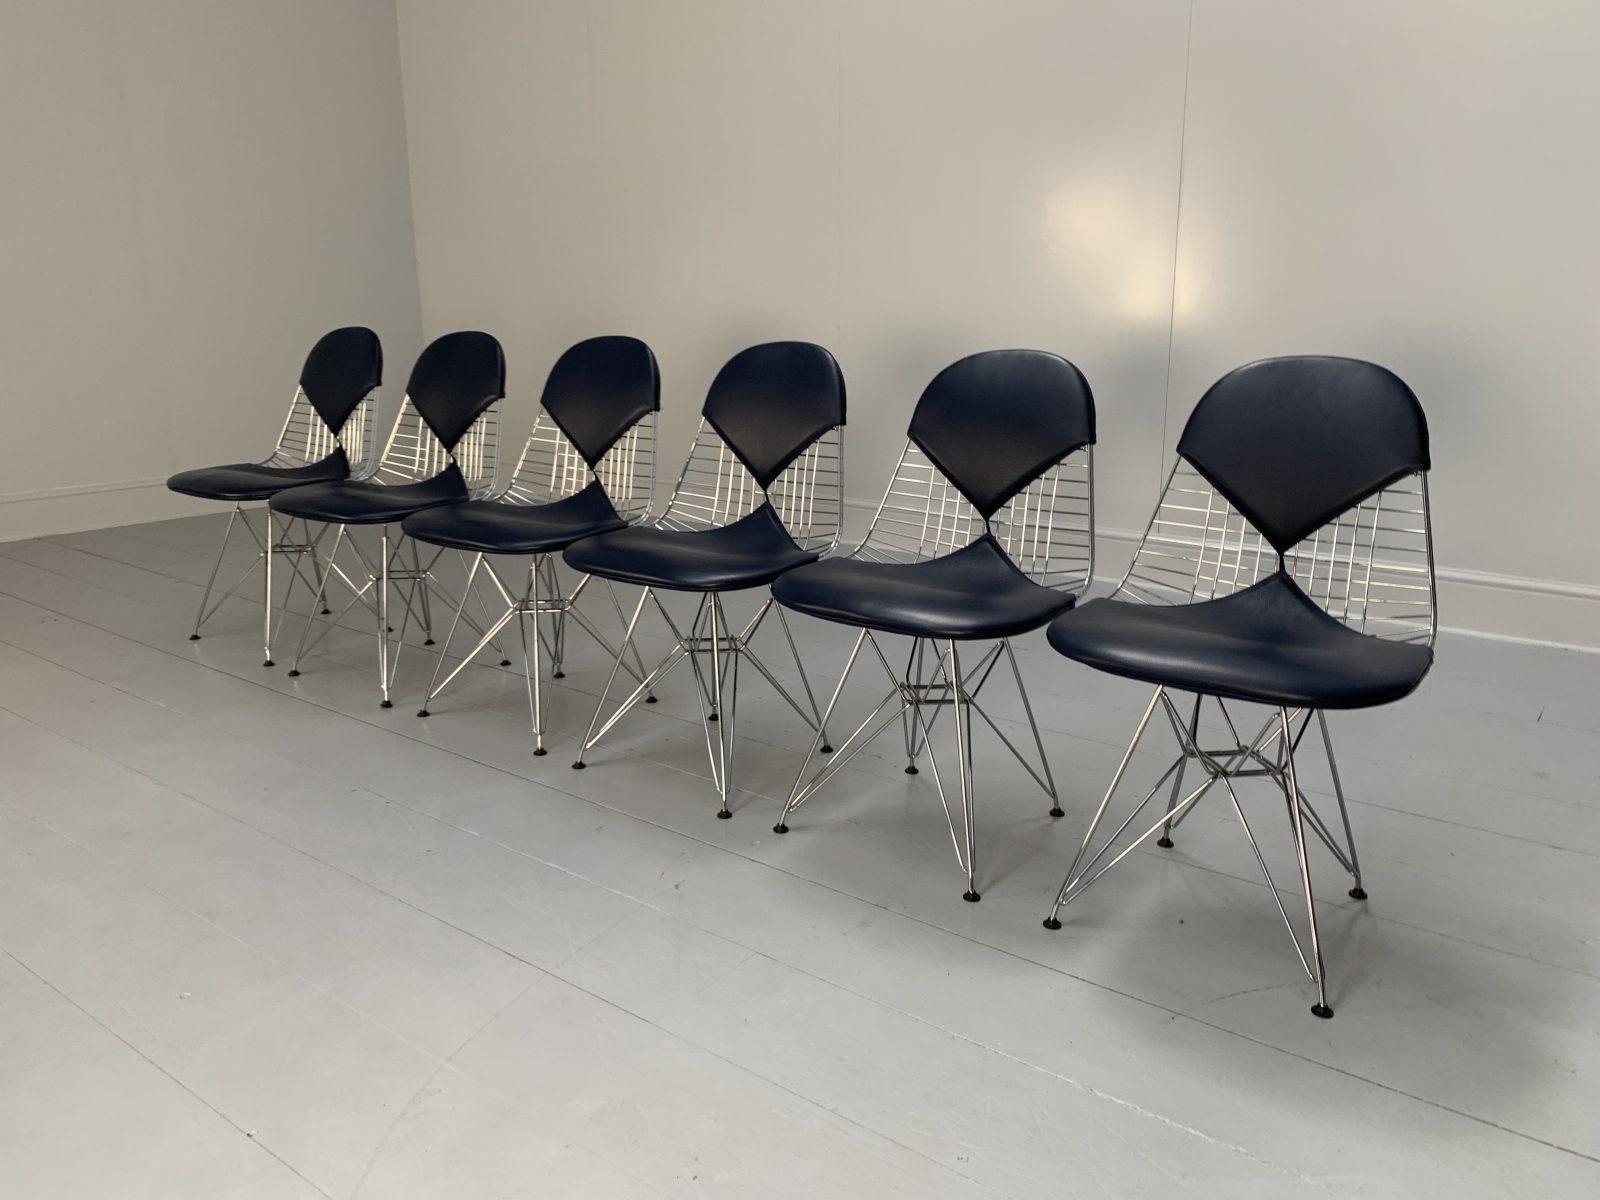 Contemporary Suite of 6 Vitra “Eames DKR-2 Bikini” Chairs in Navy Blue Premium Leather For Sale